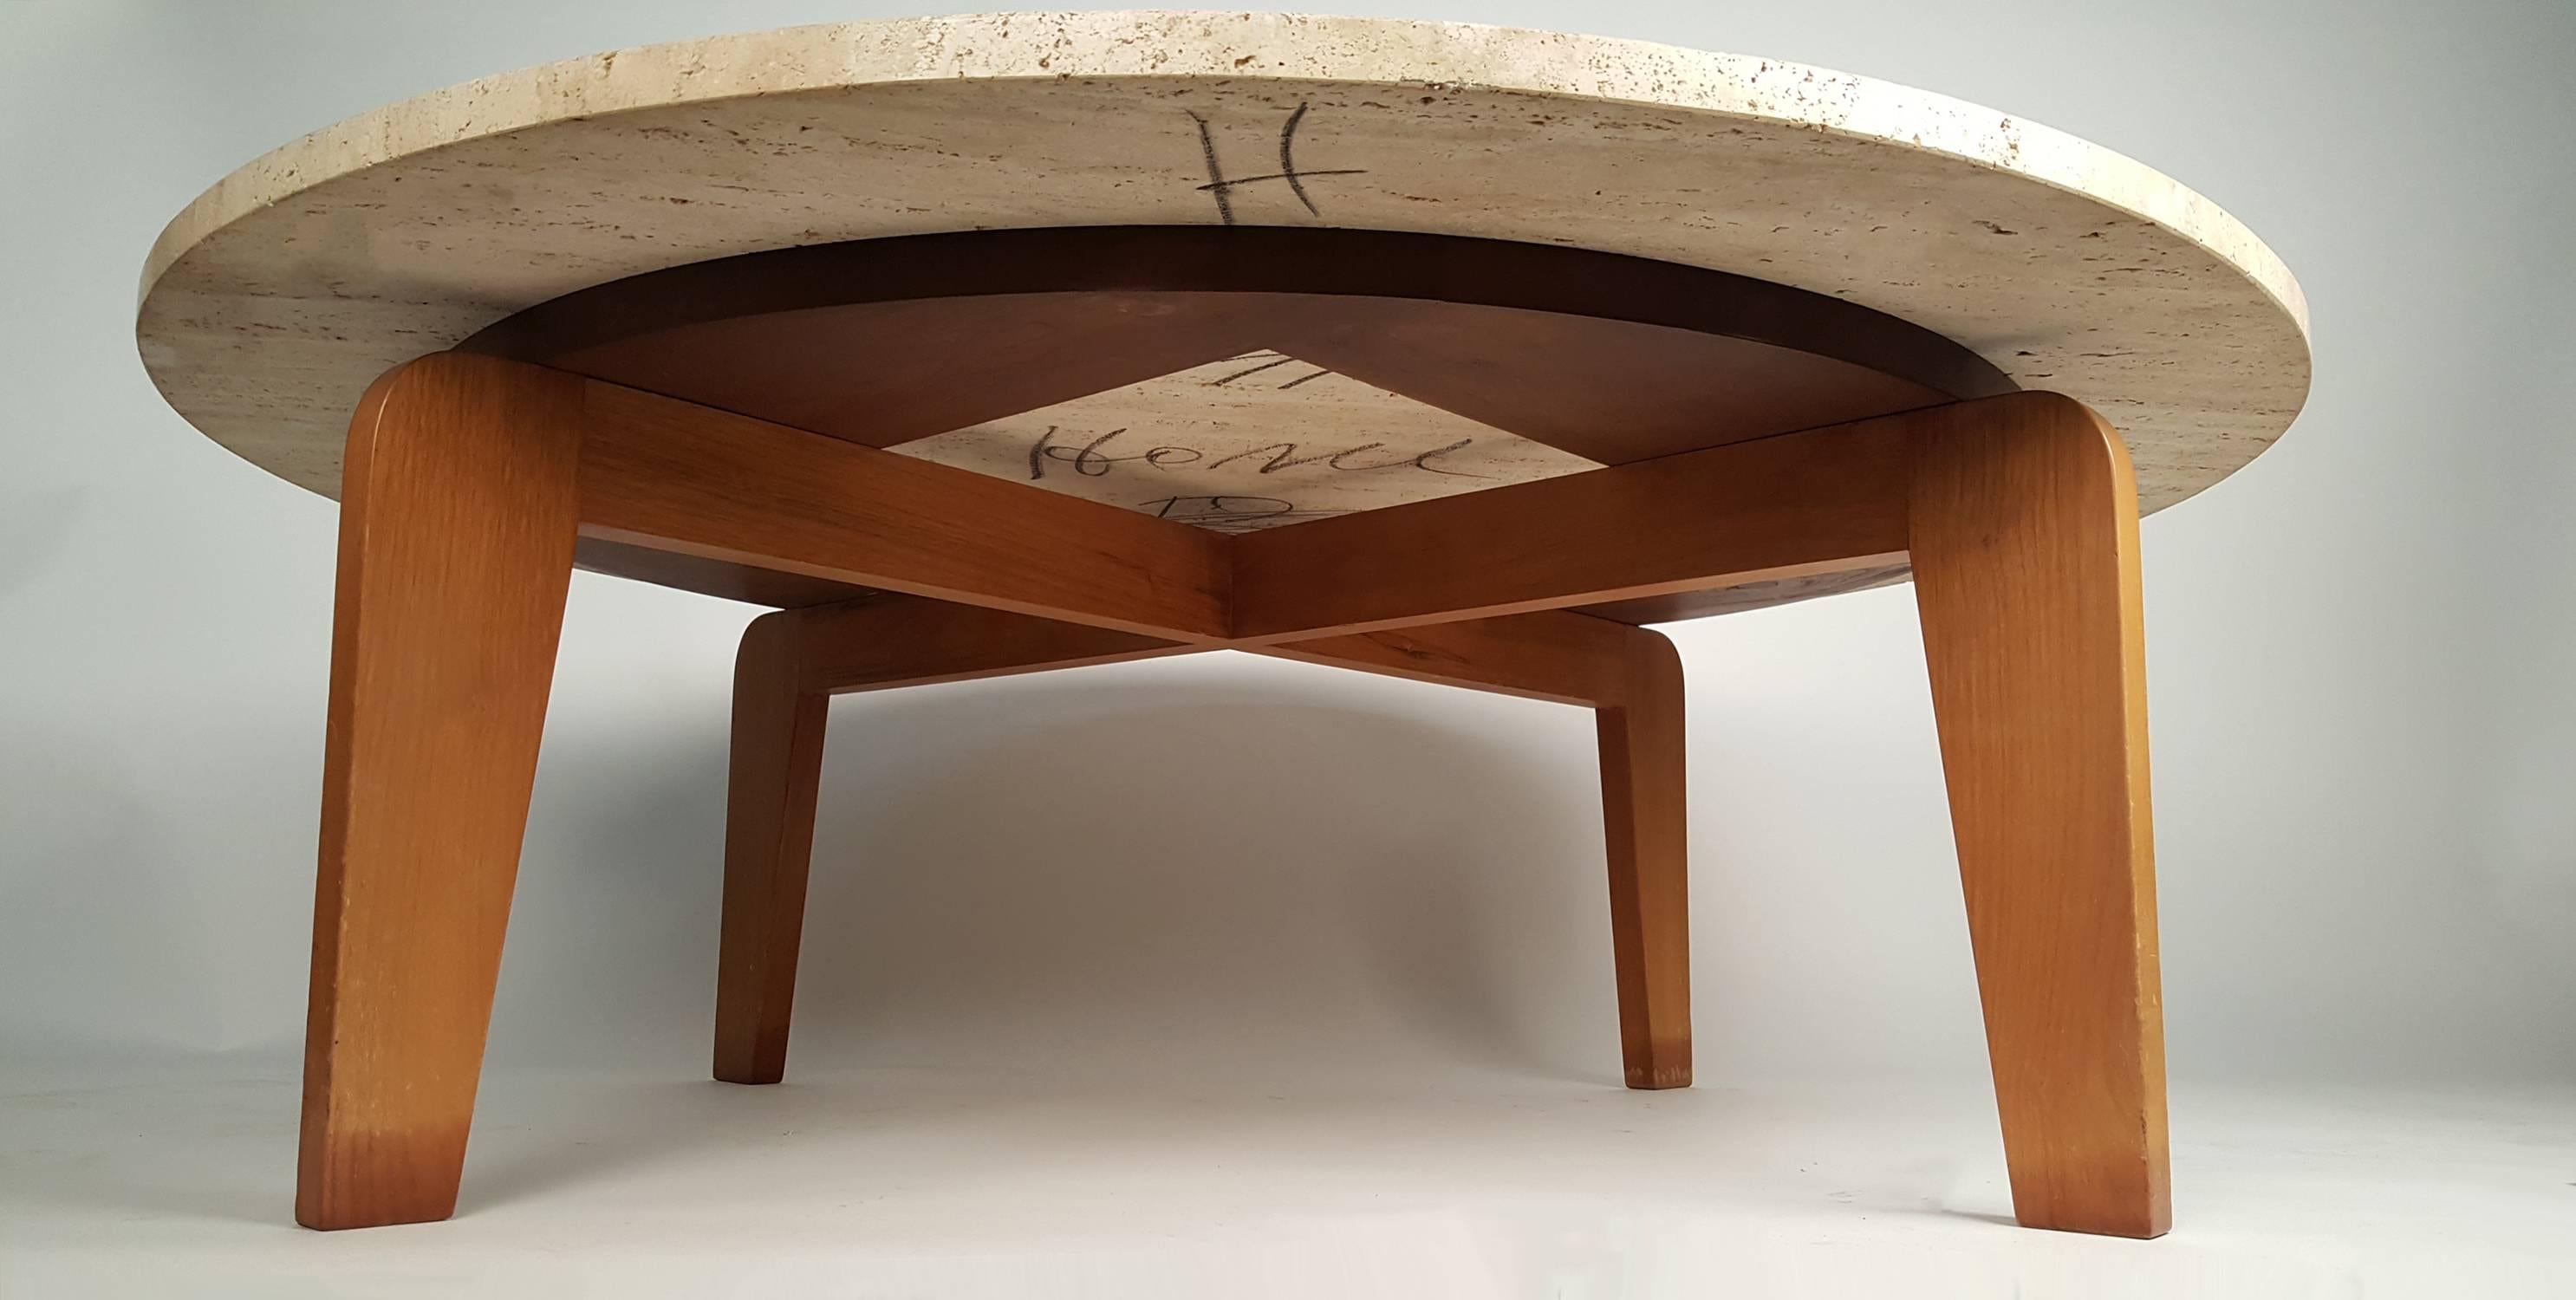 Custom 1960s Travertine coffee table in the style of Jean Prouve. Solid wood architectural frame.